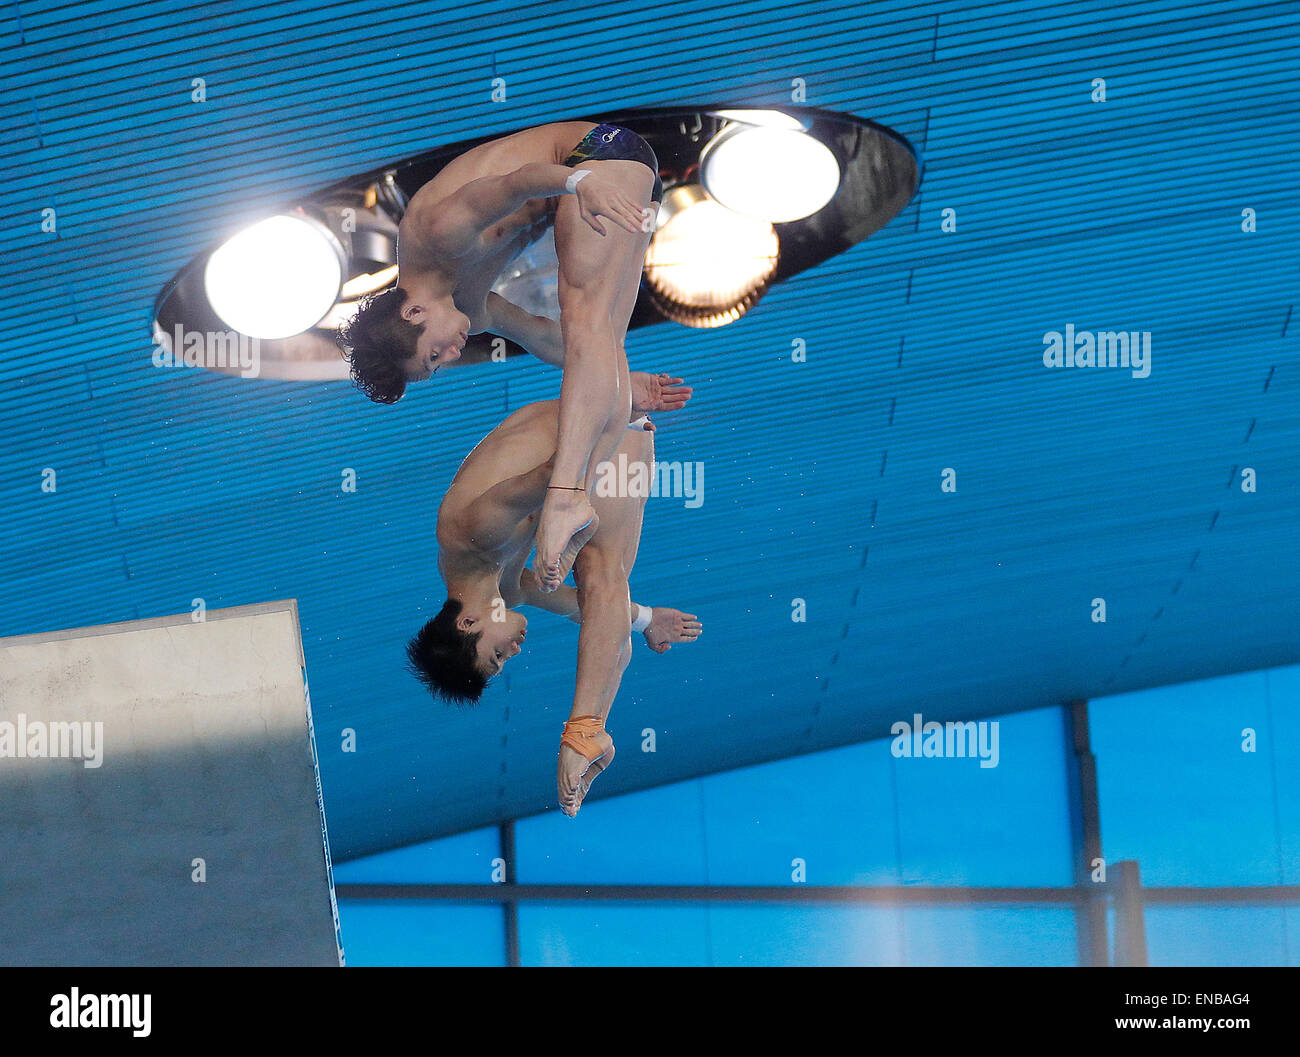 LONDON, UNITED KINGDOM - MAY 01: Yue Lin and Aisen Chen of China compete in the 10m Platform Synchro Men Final during day one of the FINA/NVC Diving World Series 2015 at the London Aquatics Centre on May 01, 2015 in London, Great Britain. (Photo by Mitchell Gunn/ESPA) Stock Photo